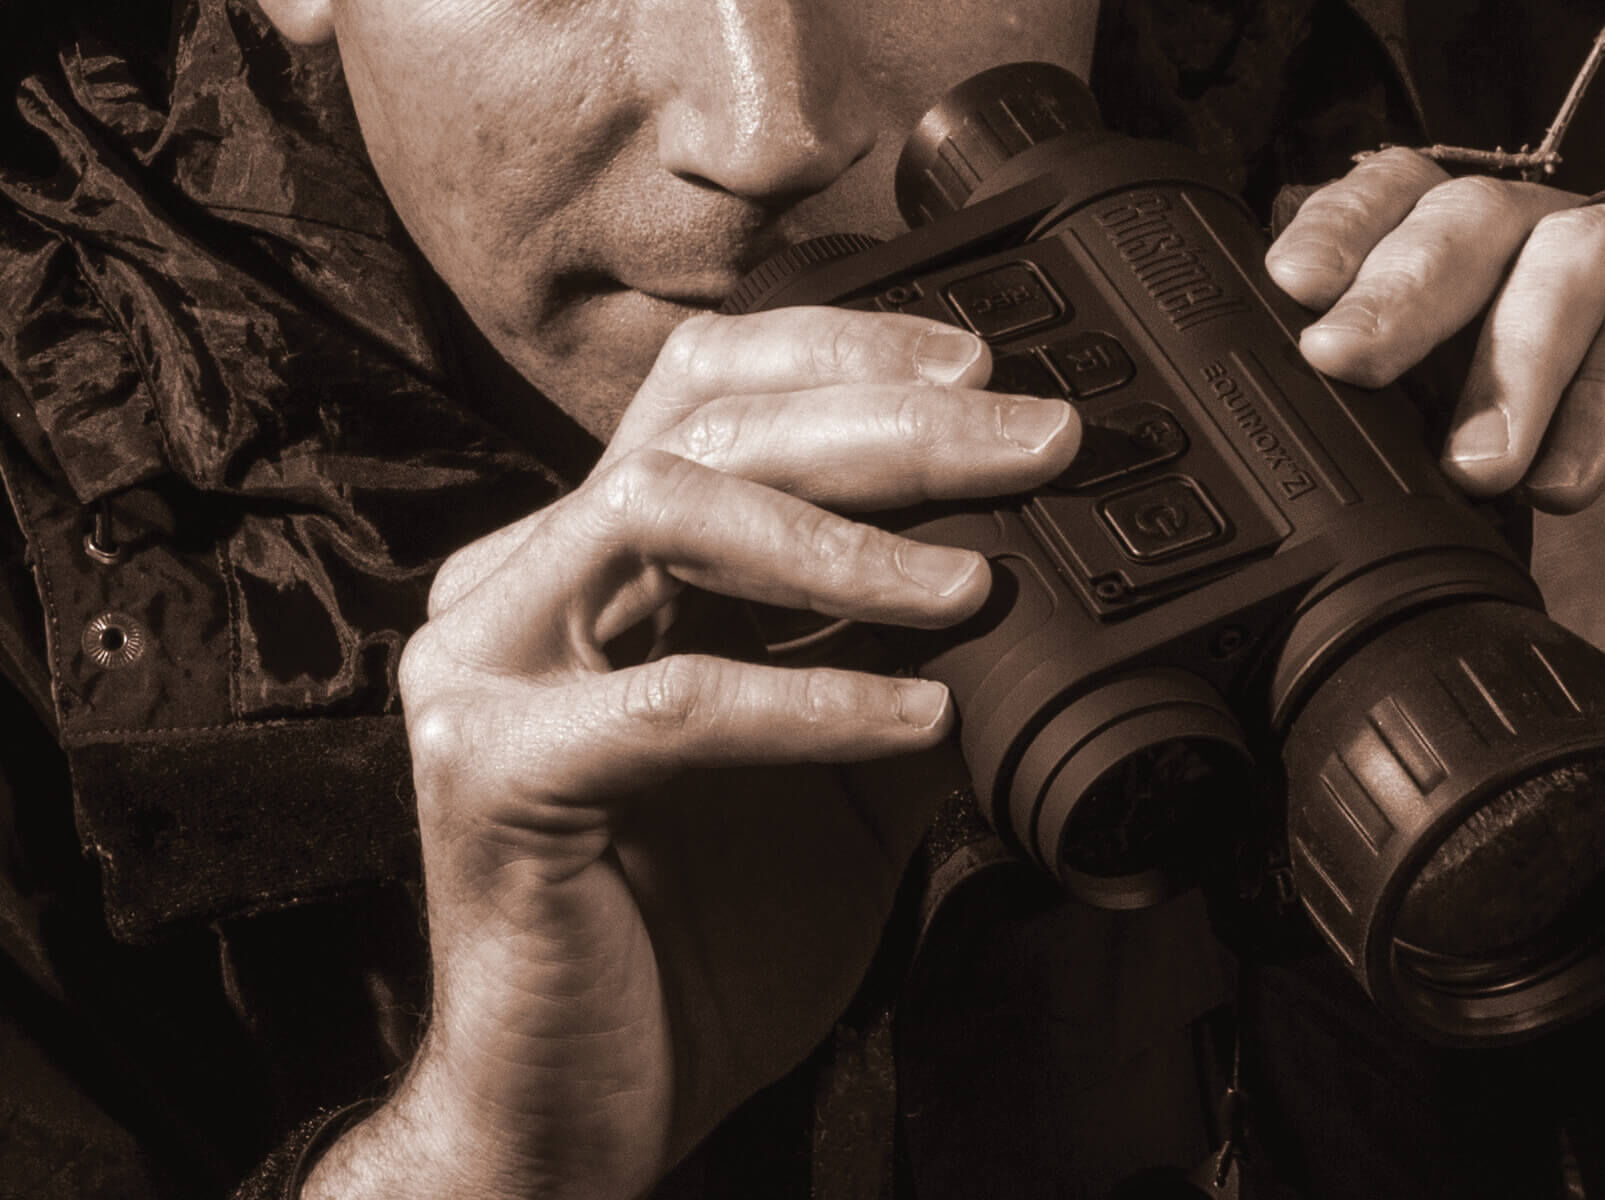 Shop All Night Vision Collections, and More For All Your Outdoor